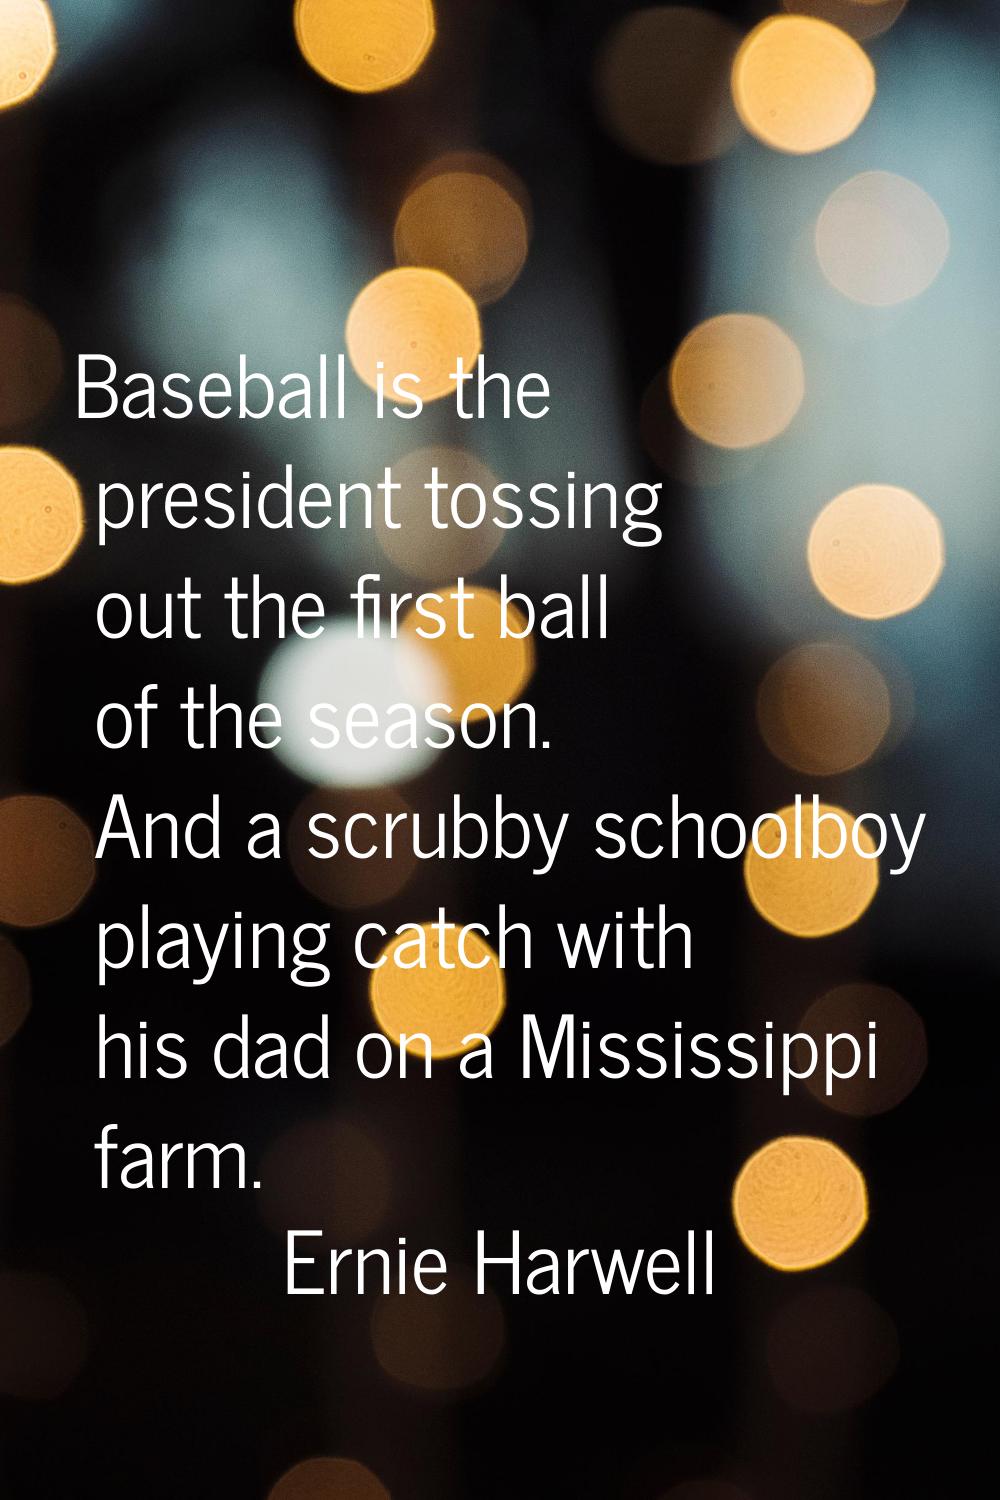 Baseball is the president tossing out the first ball of the season. And a scrubby schoolboy playing